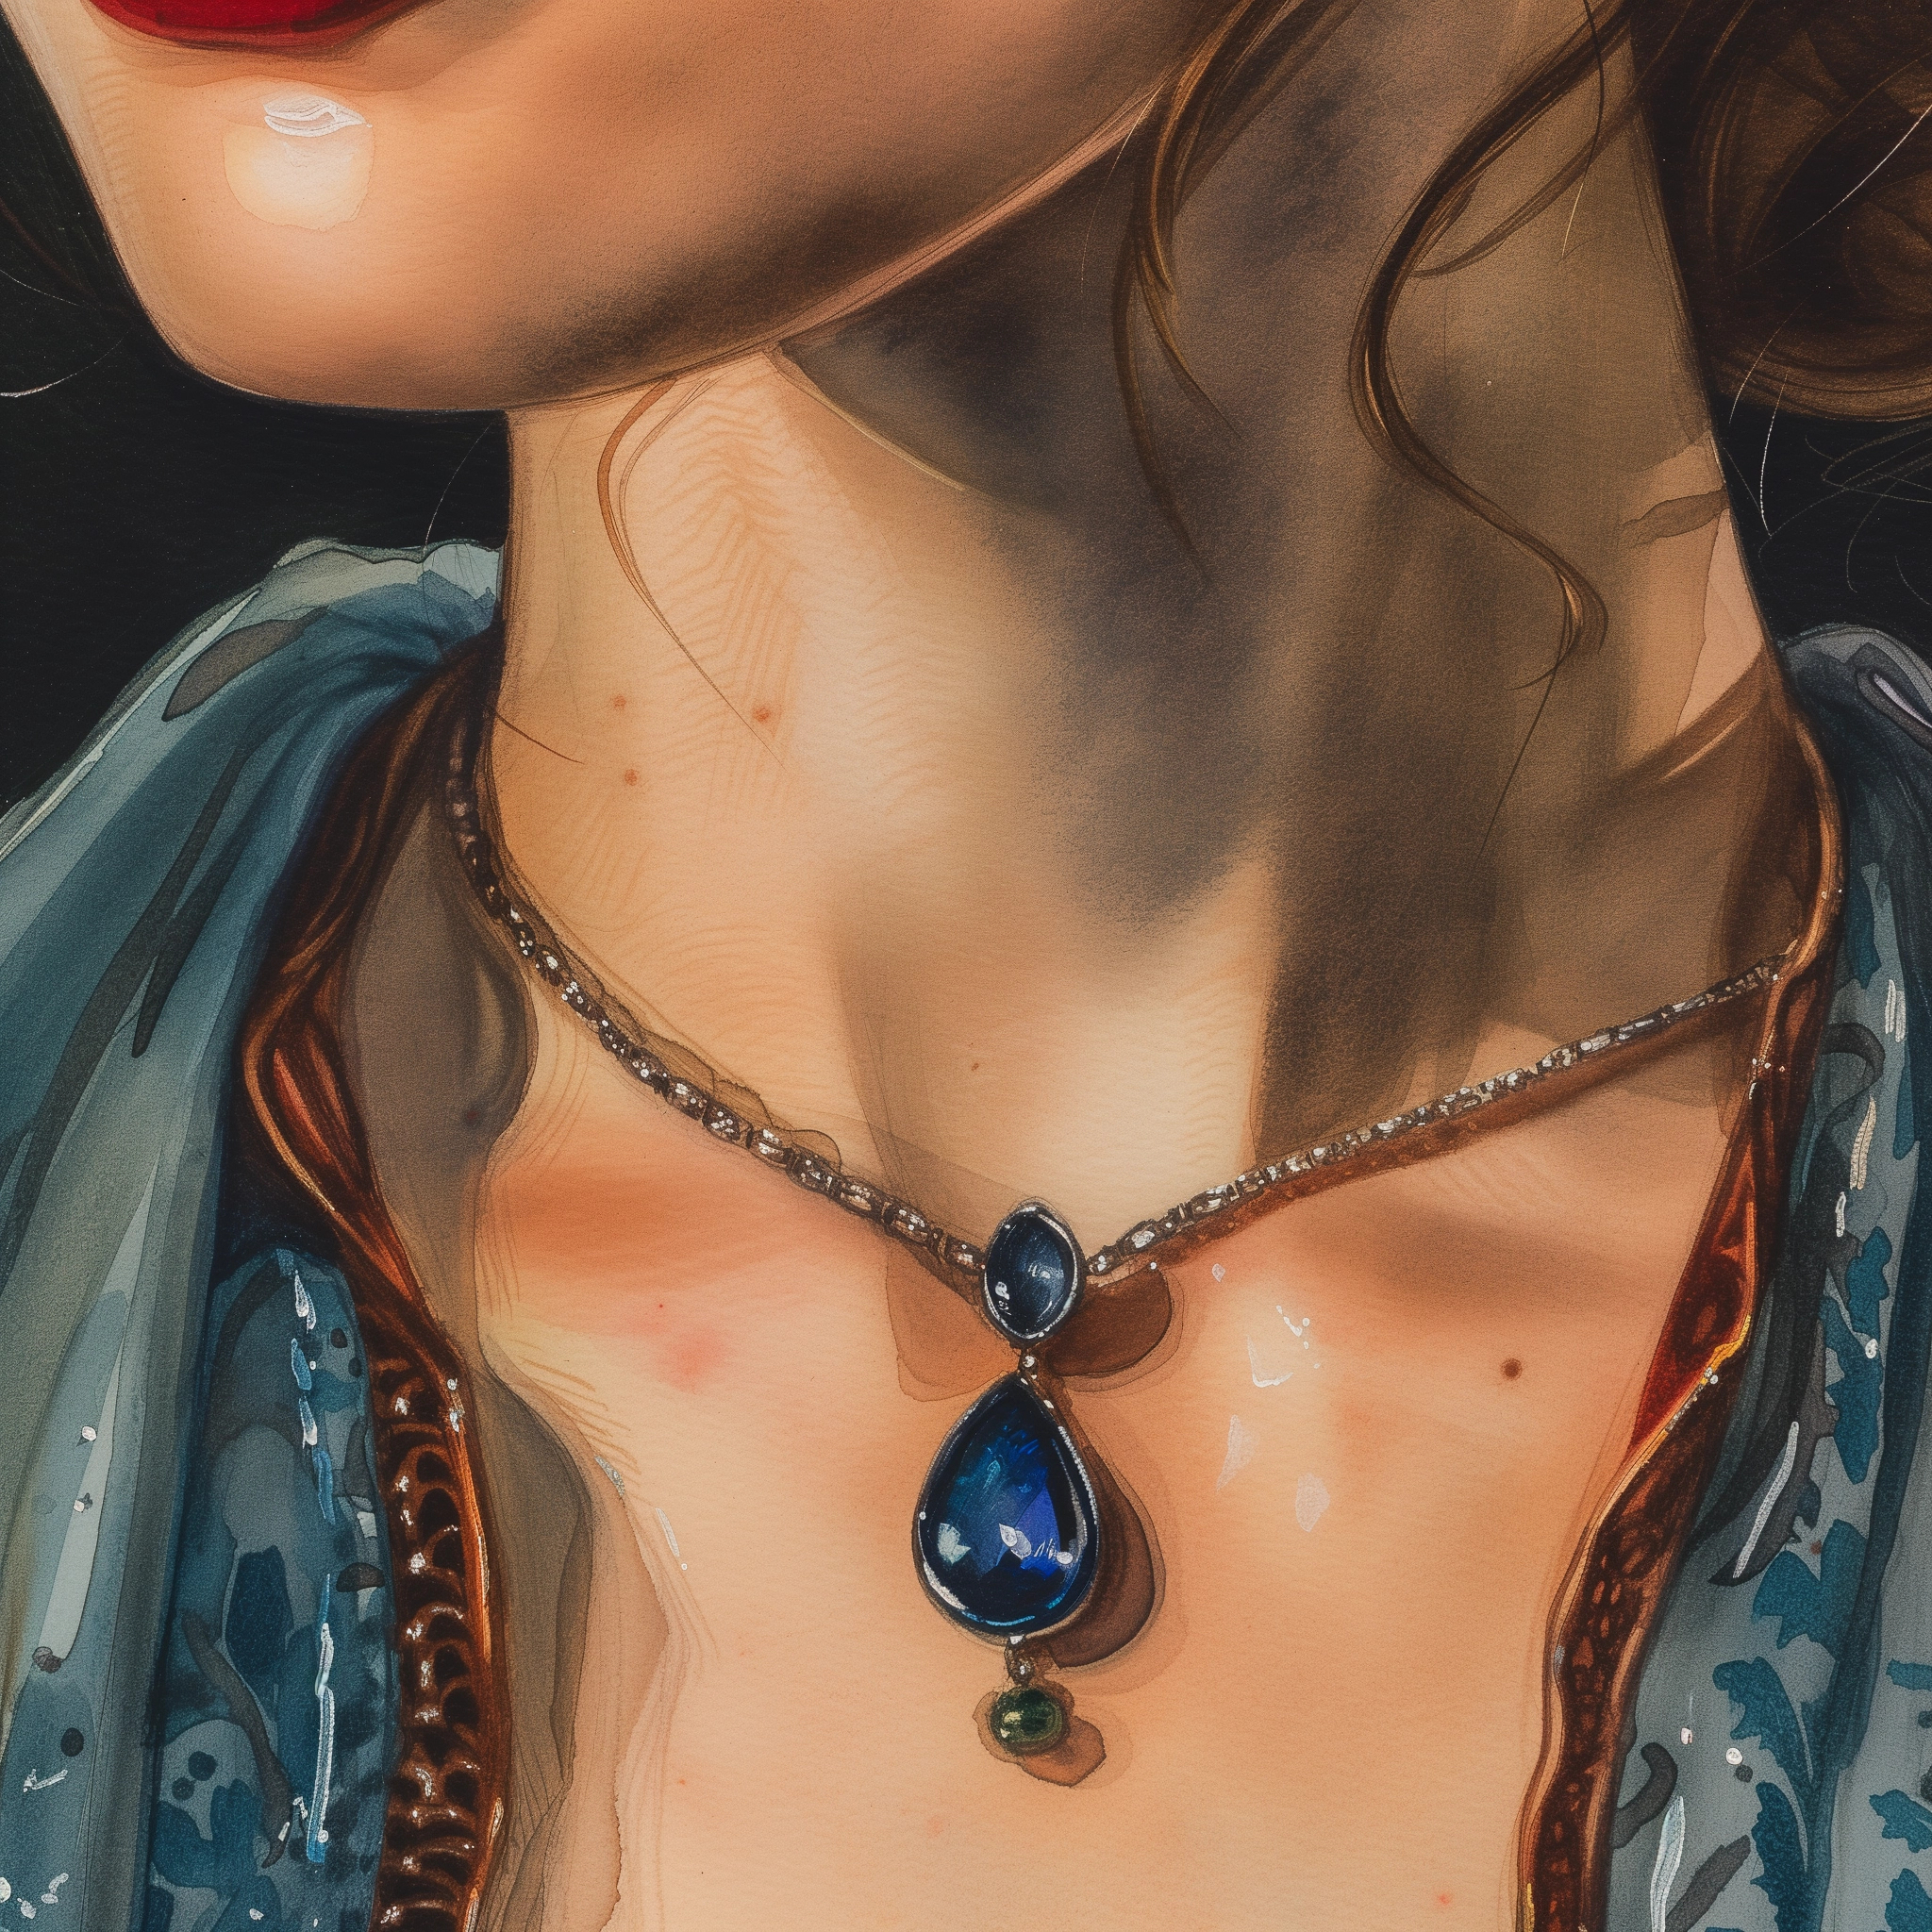 Close-up avatar of a woman wearing an elegant blue pendant necklace.